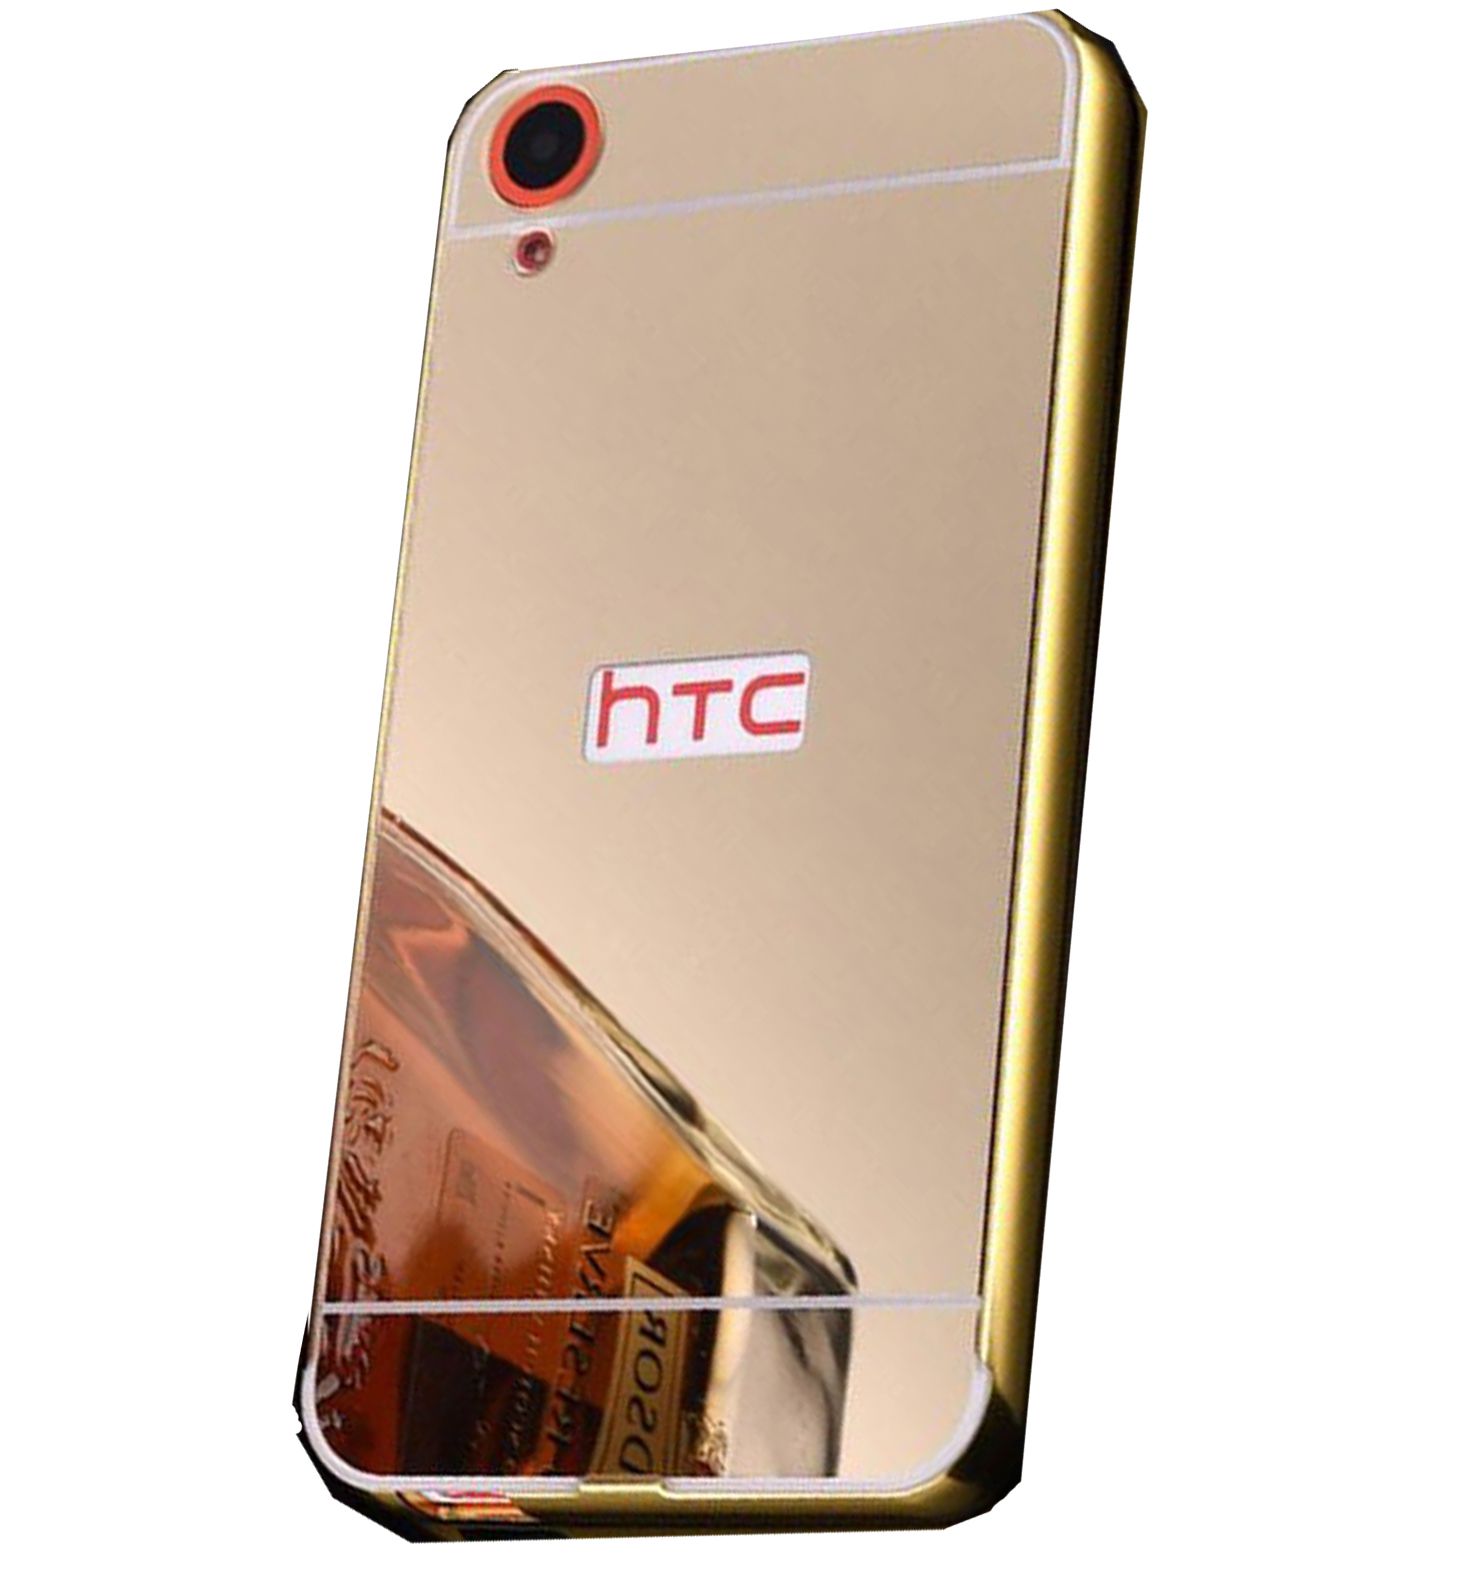 HTC Desire 728 Cover BM - Golden - Plain Back Covers Online at Low Prices | Snapdeal India